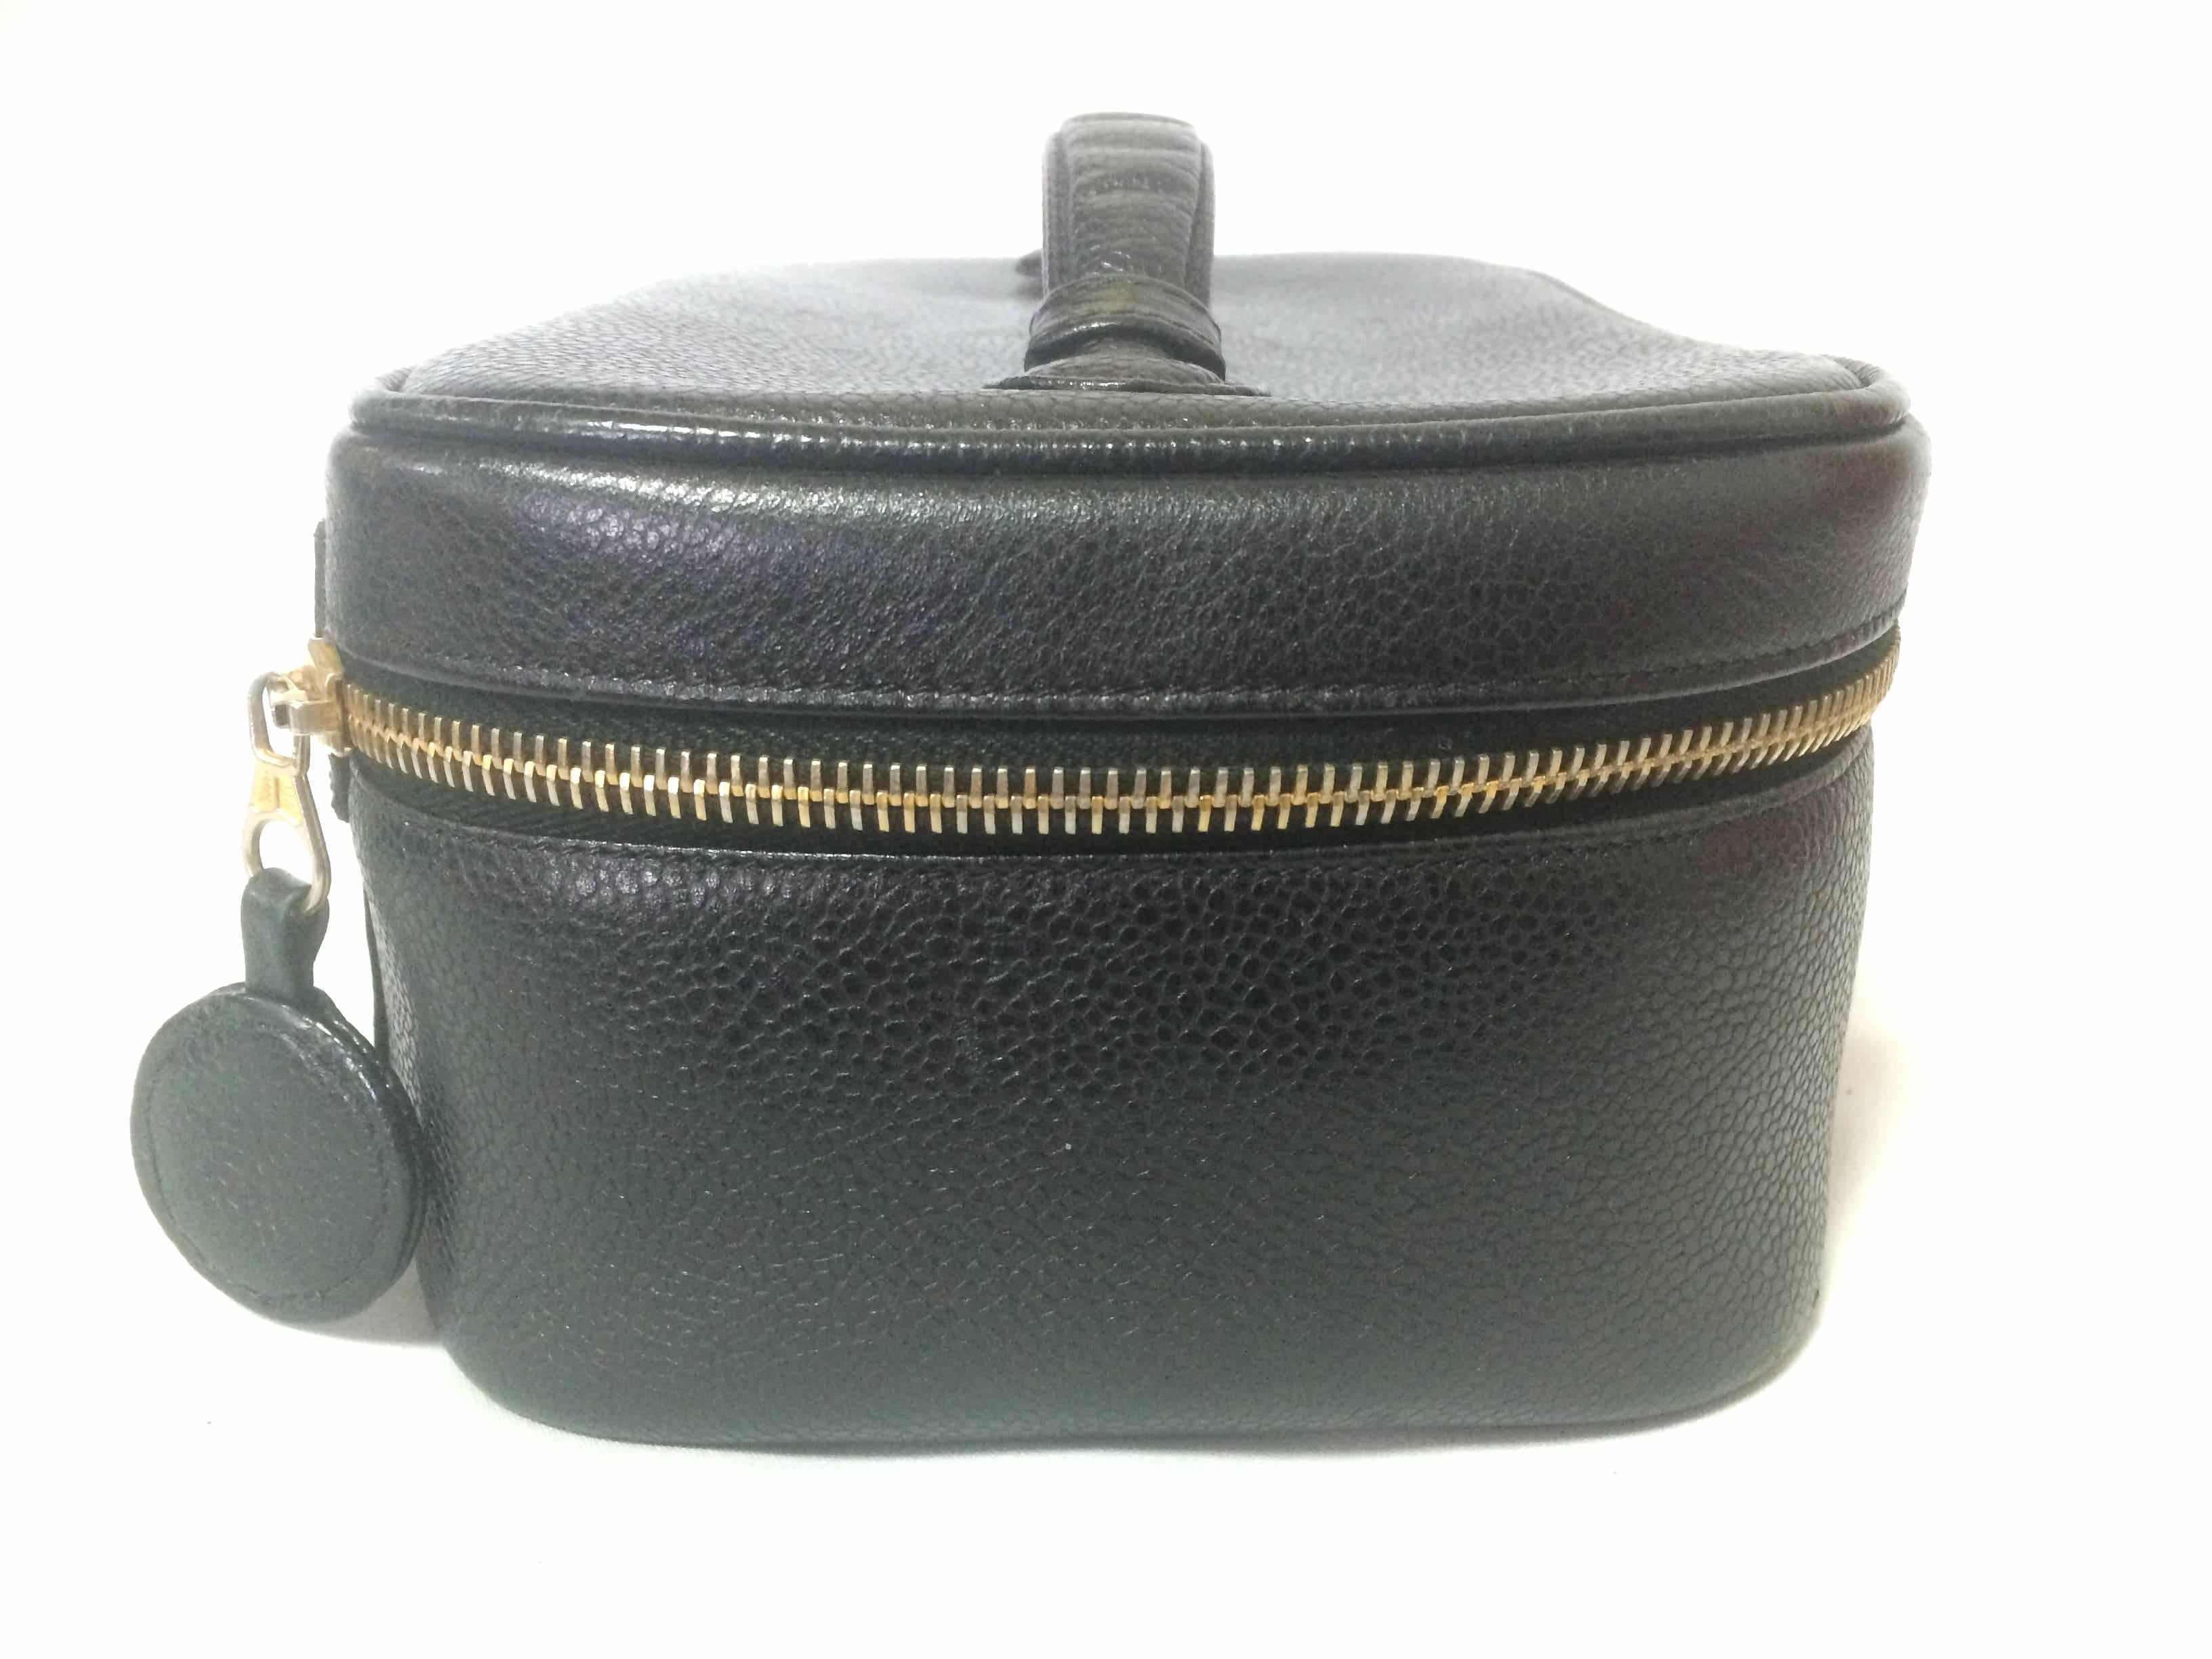 Women's Vintage CHANEL caviarskin cosmetic and toiletry black purse. Classic vanity bag.